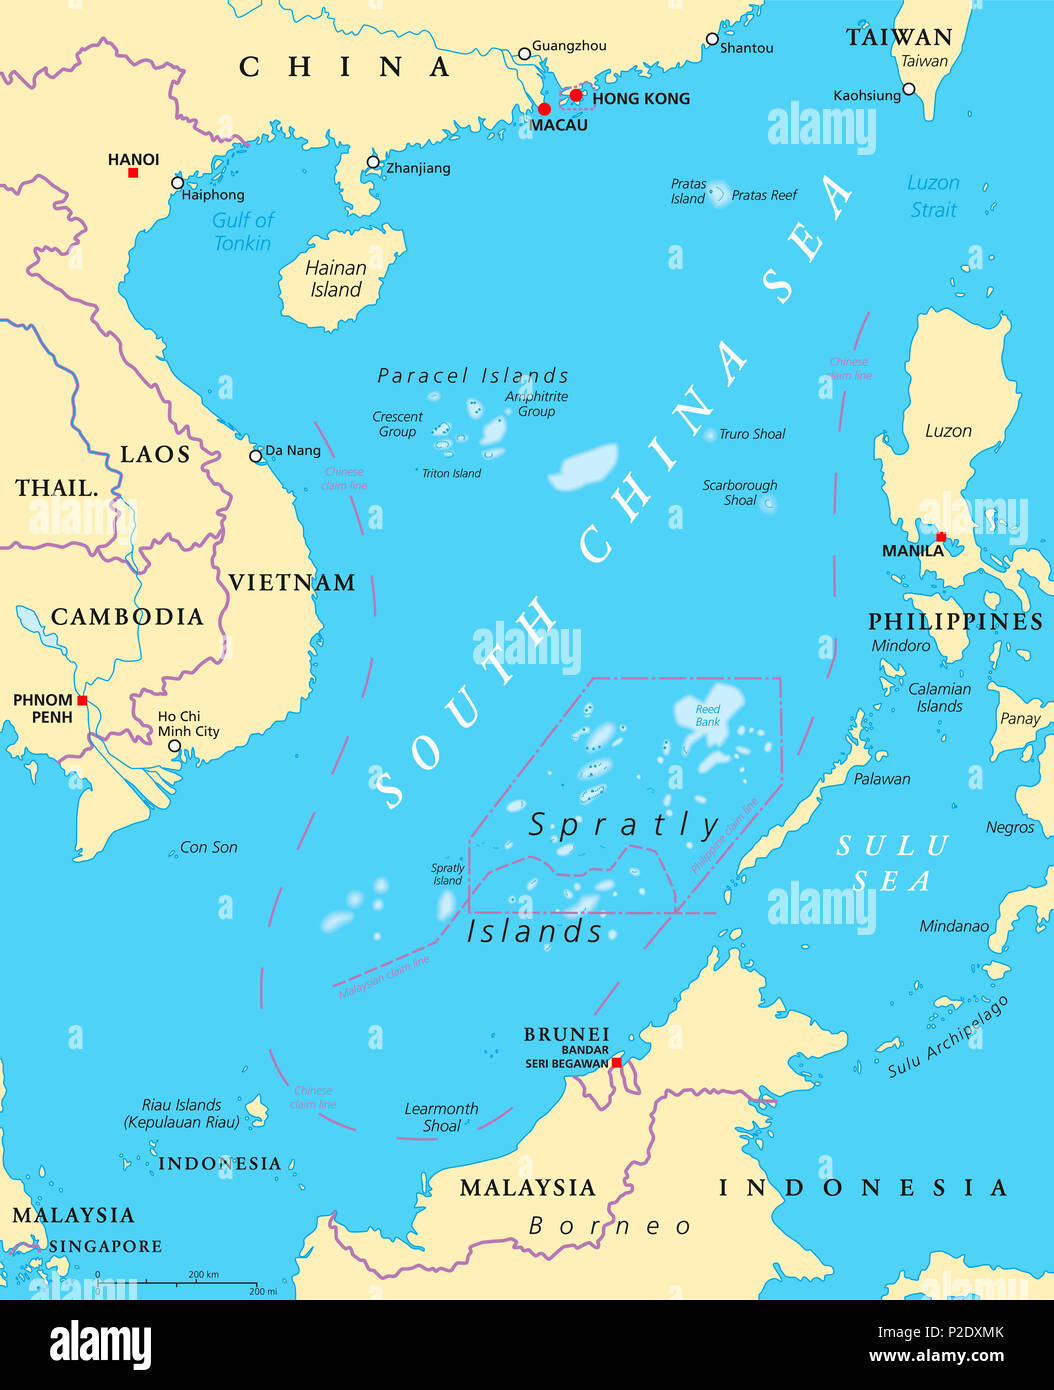 South China Sea Islands Political Map Paracel Islands And